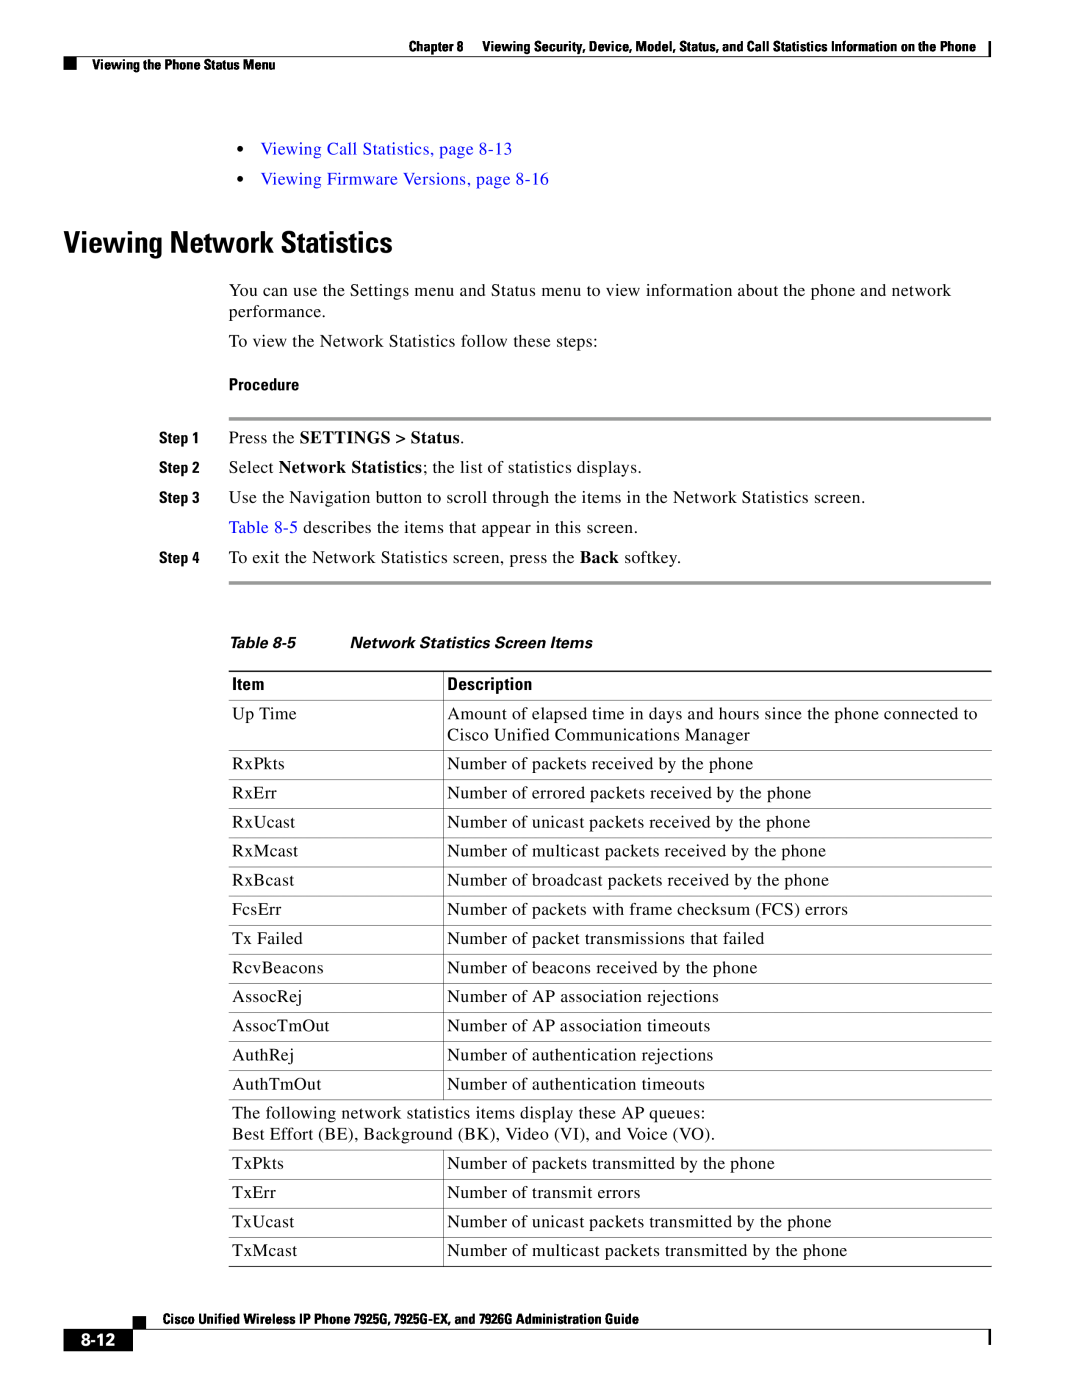 Cisco Systems 7925G, 7926G Viewing Network Statistics, Viewing Call Statistics, page Viewing Firmware Versions, page, 8-12 